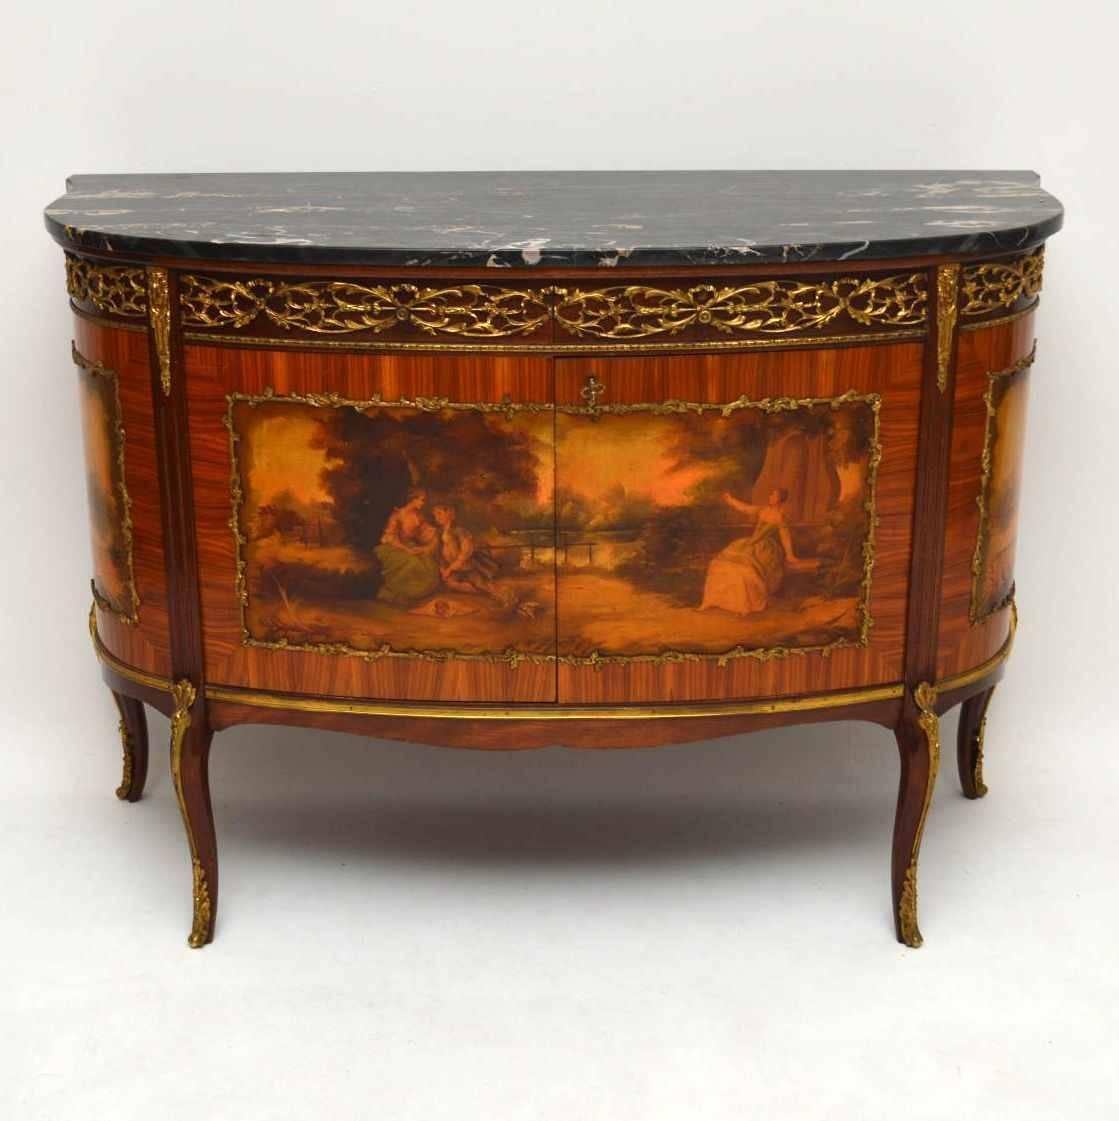 Impressive antique French marble top cabinet with very nice decorative scenes on the doors and side panels. There are lots of fine quality gilt bronze mounts and the original marble top is in good condition. The wood is predominately Kingwood &